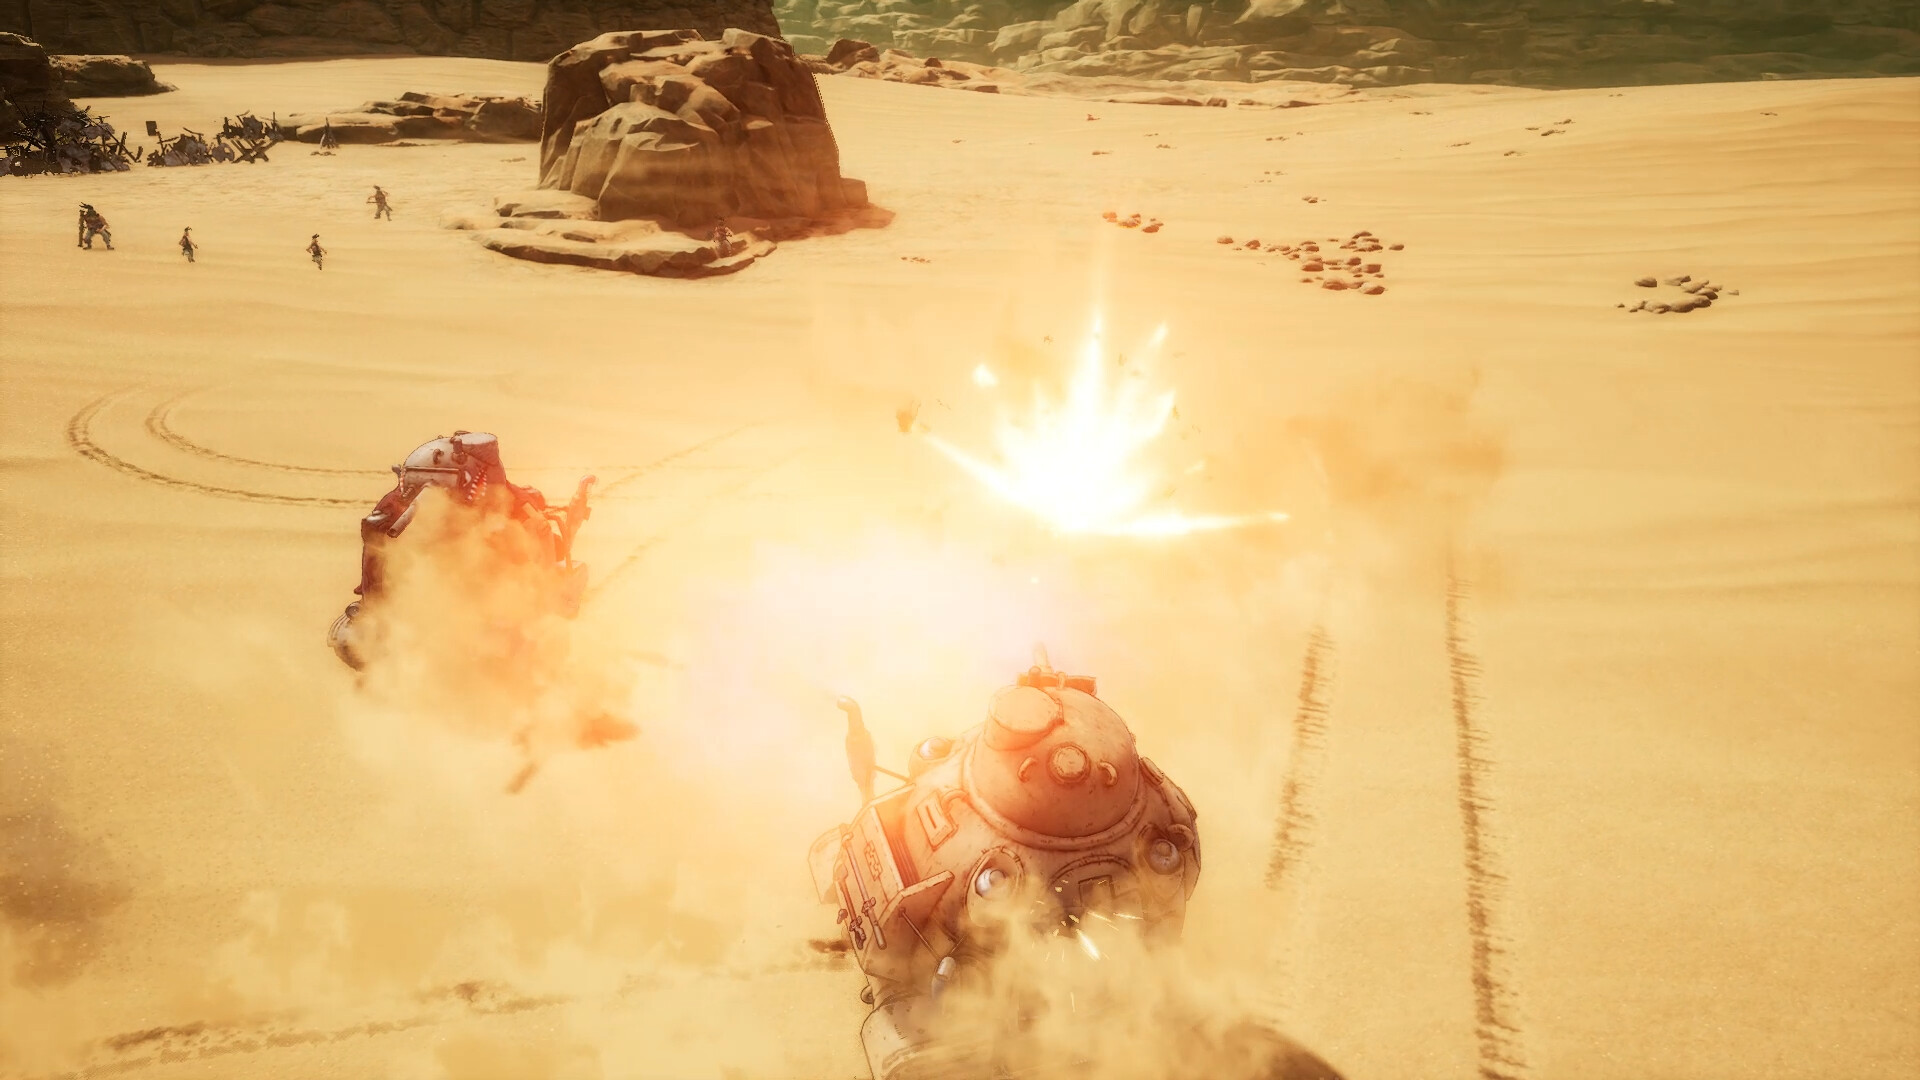 Tanks fire at one another in Sand Land.